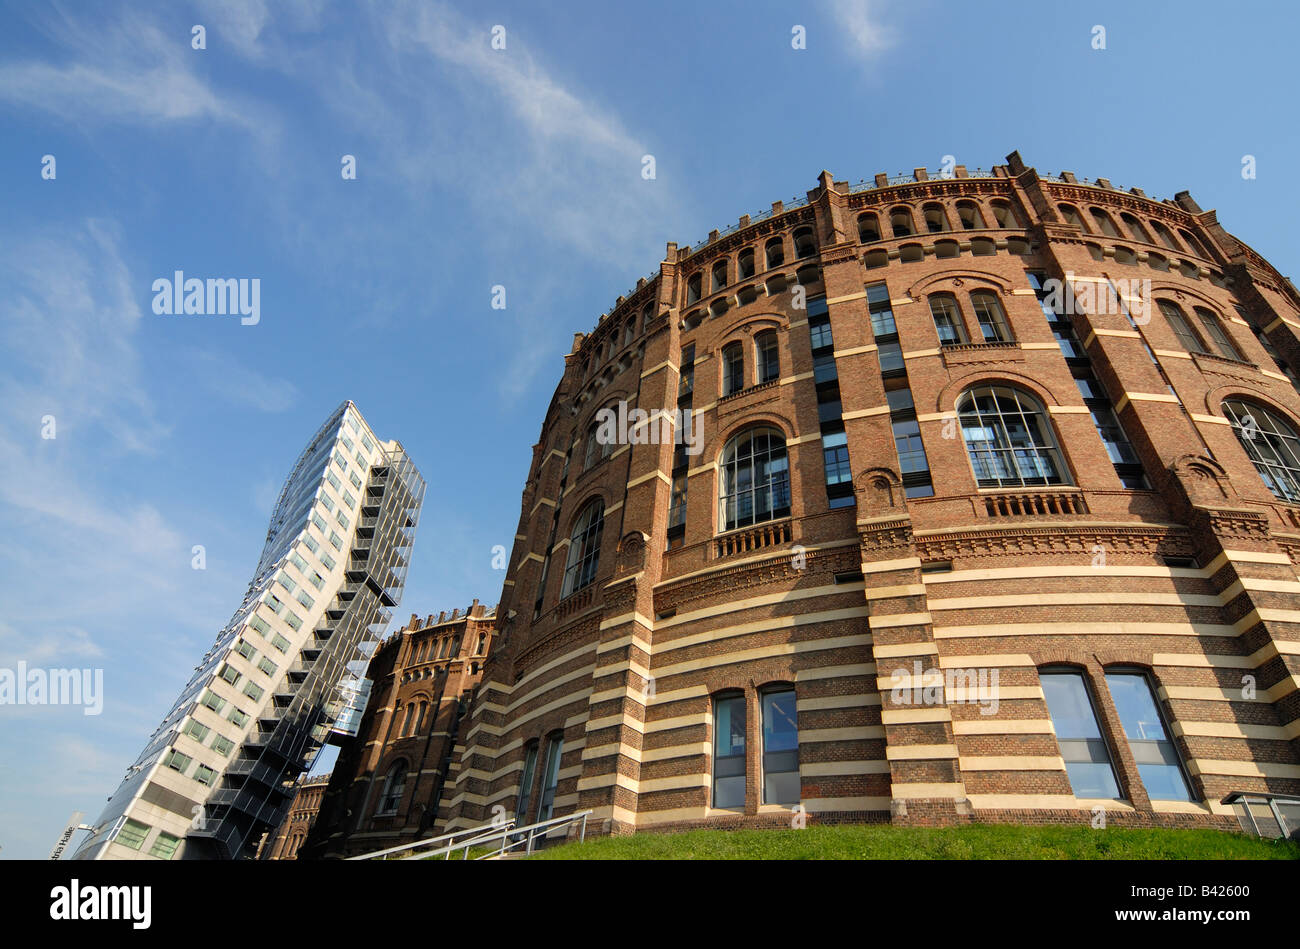 Renovated Historic Gasometers A and B in Simmering Vienna Austria Stock Photo